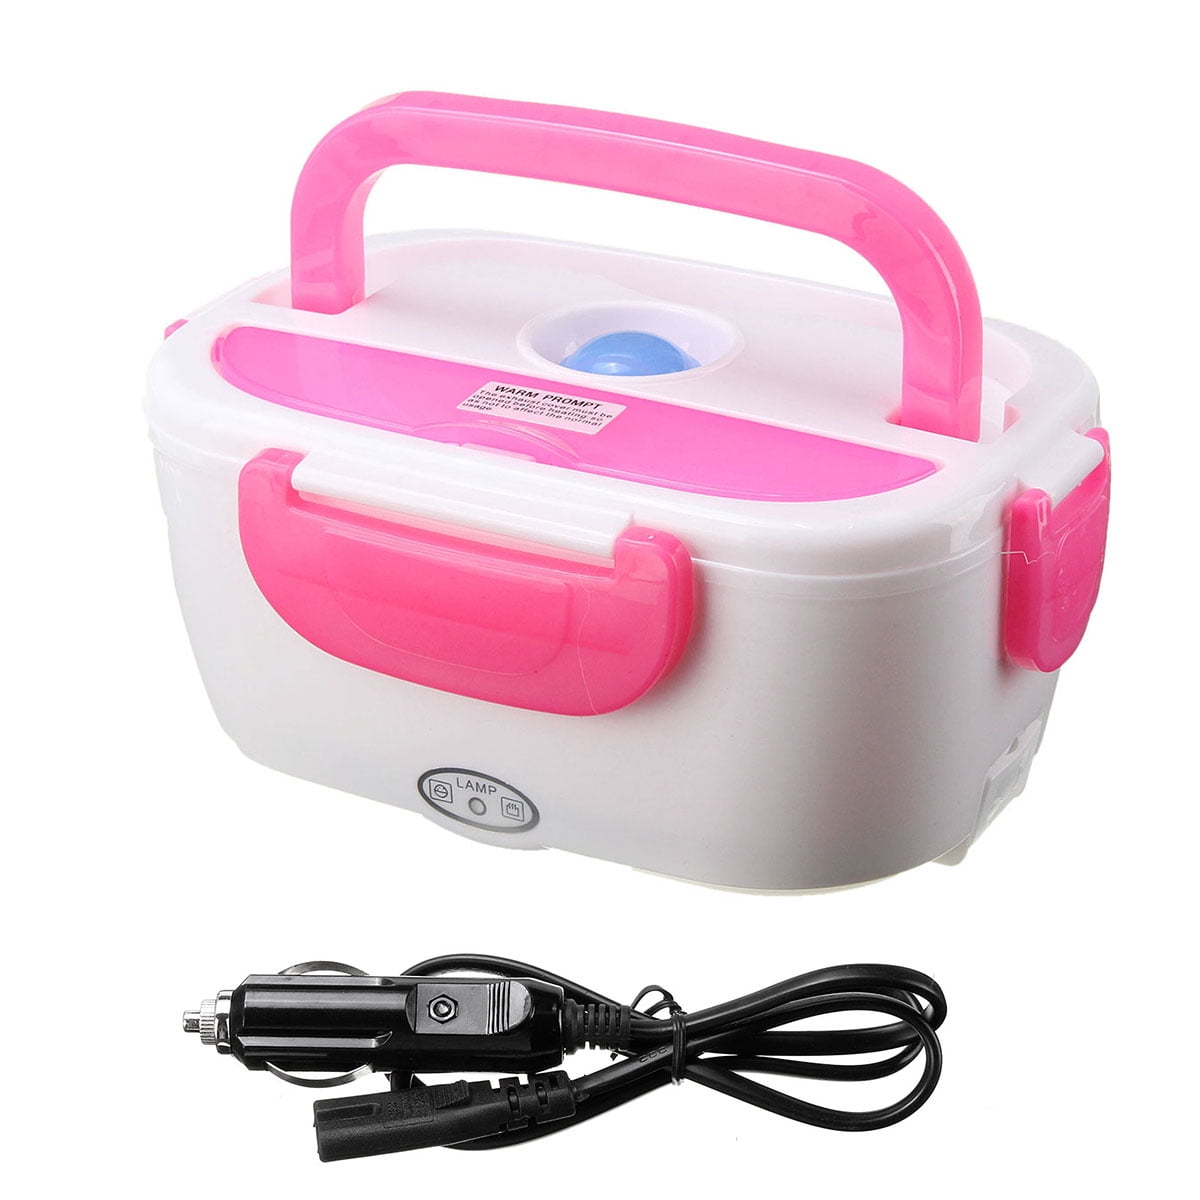 Crockpot Electric Lunch Box, Portable Food Warmer for Travel, Car, On-the-Go,  20-Ounce, Blush Pink,Lunchbox - AliExpress